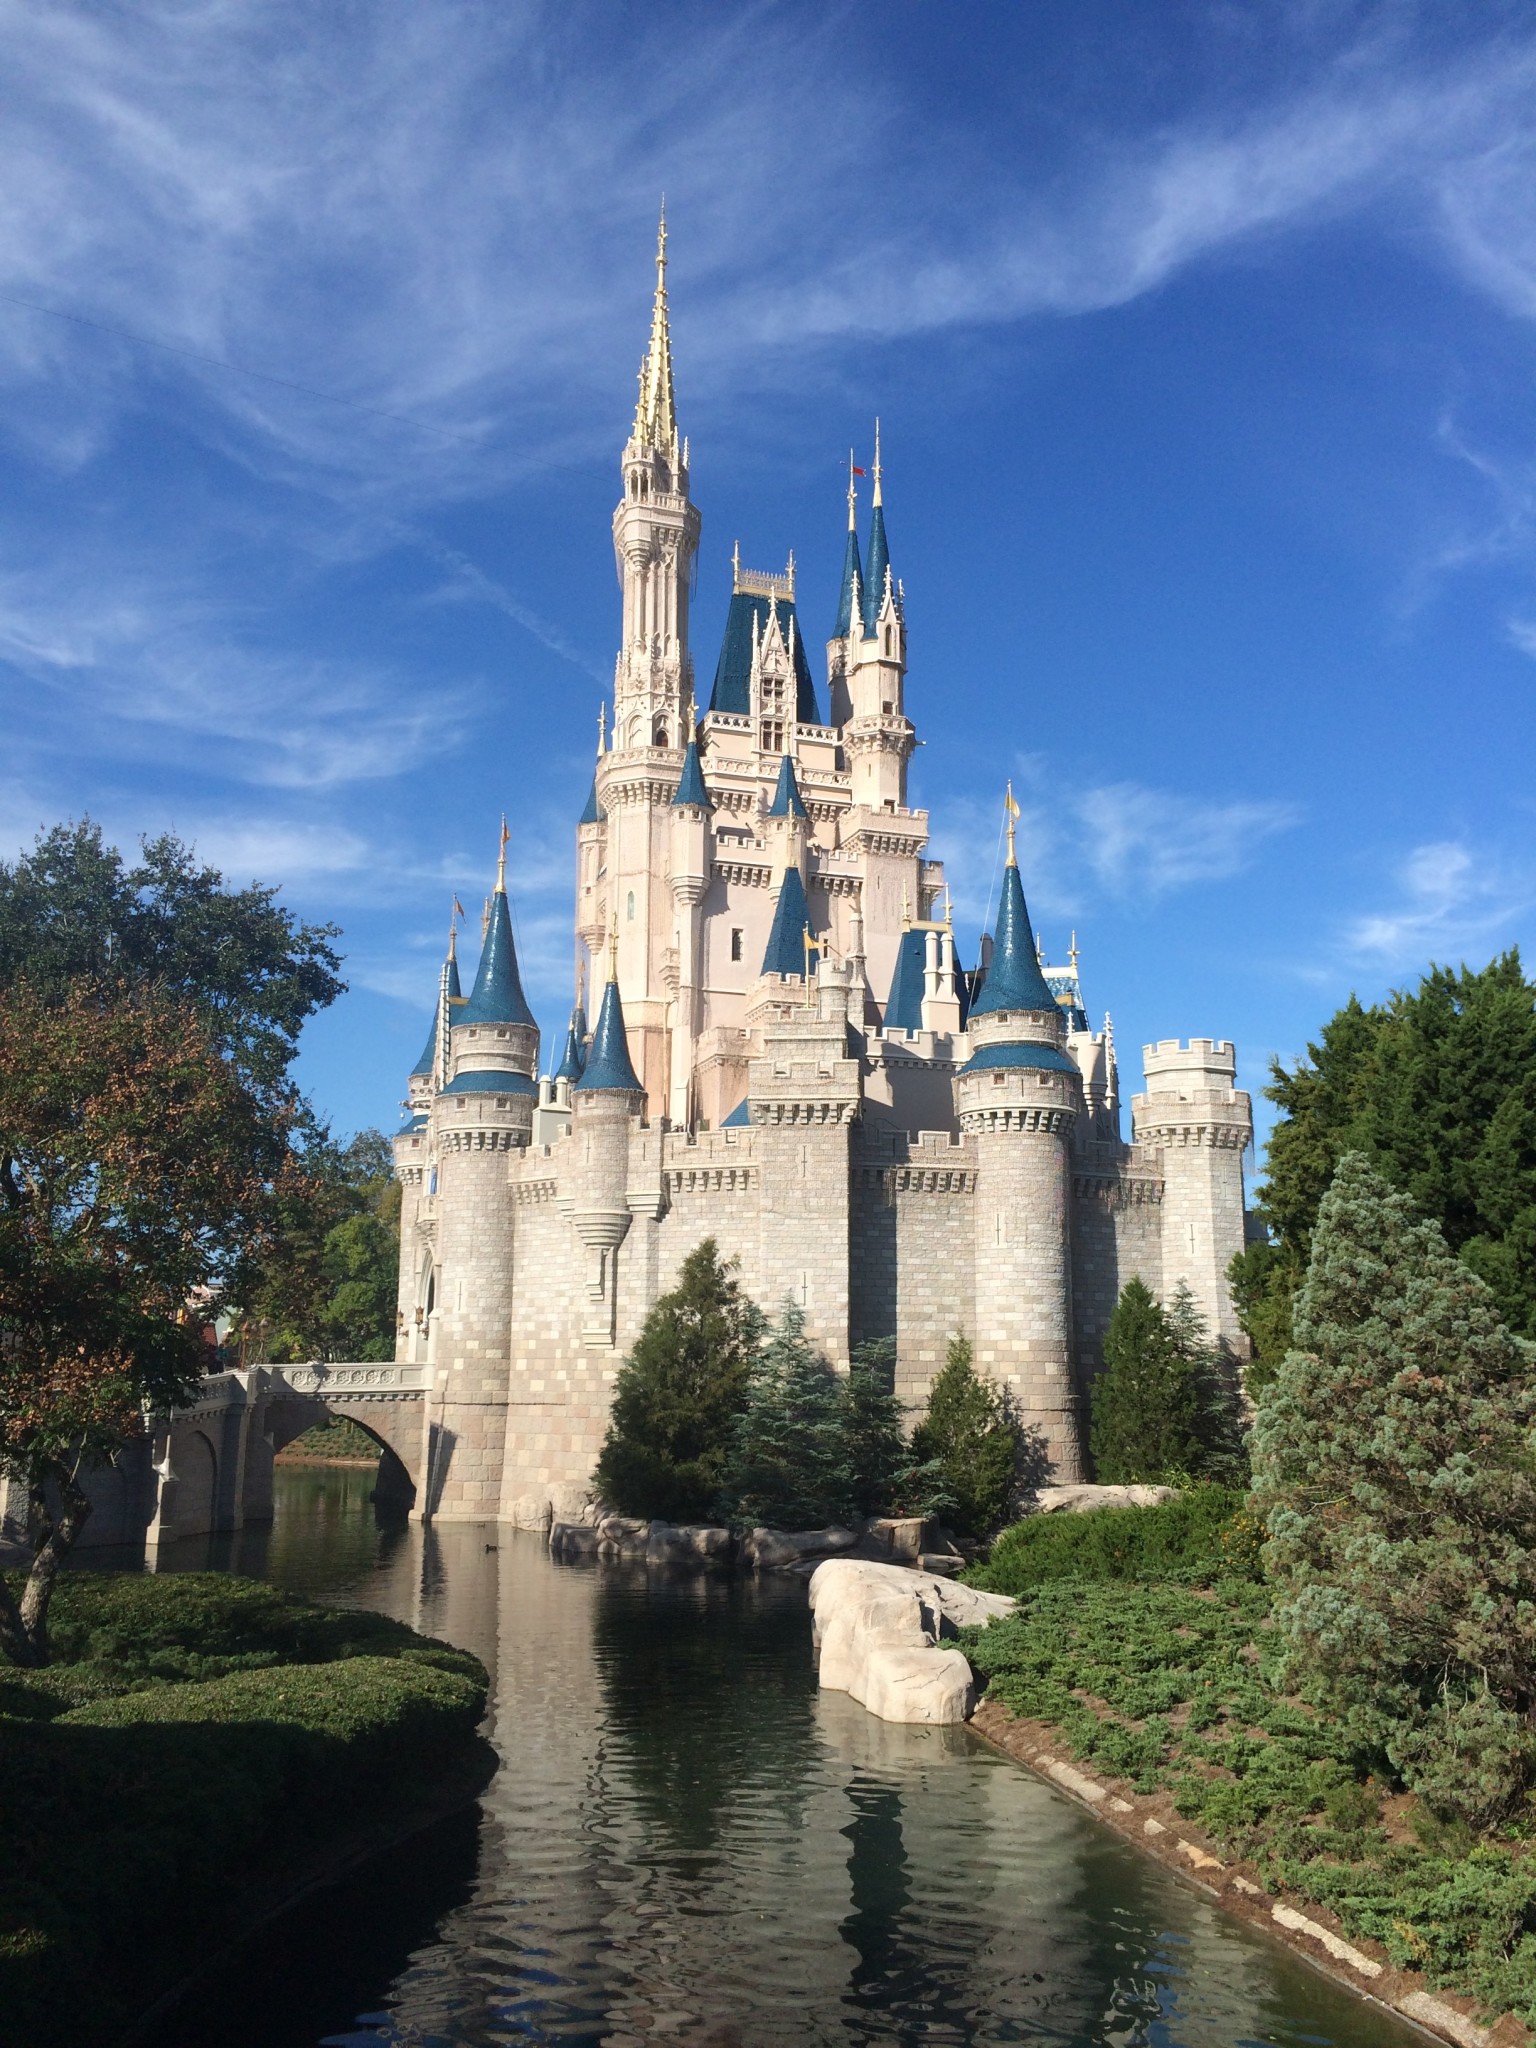 Premium Disney World Services – Guest Convenience or Money-Making Opportunity?